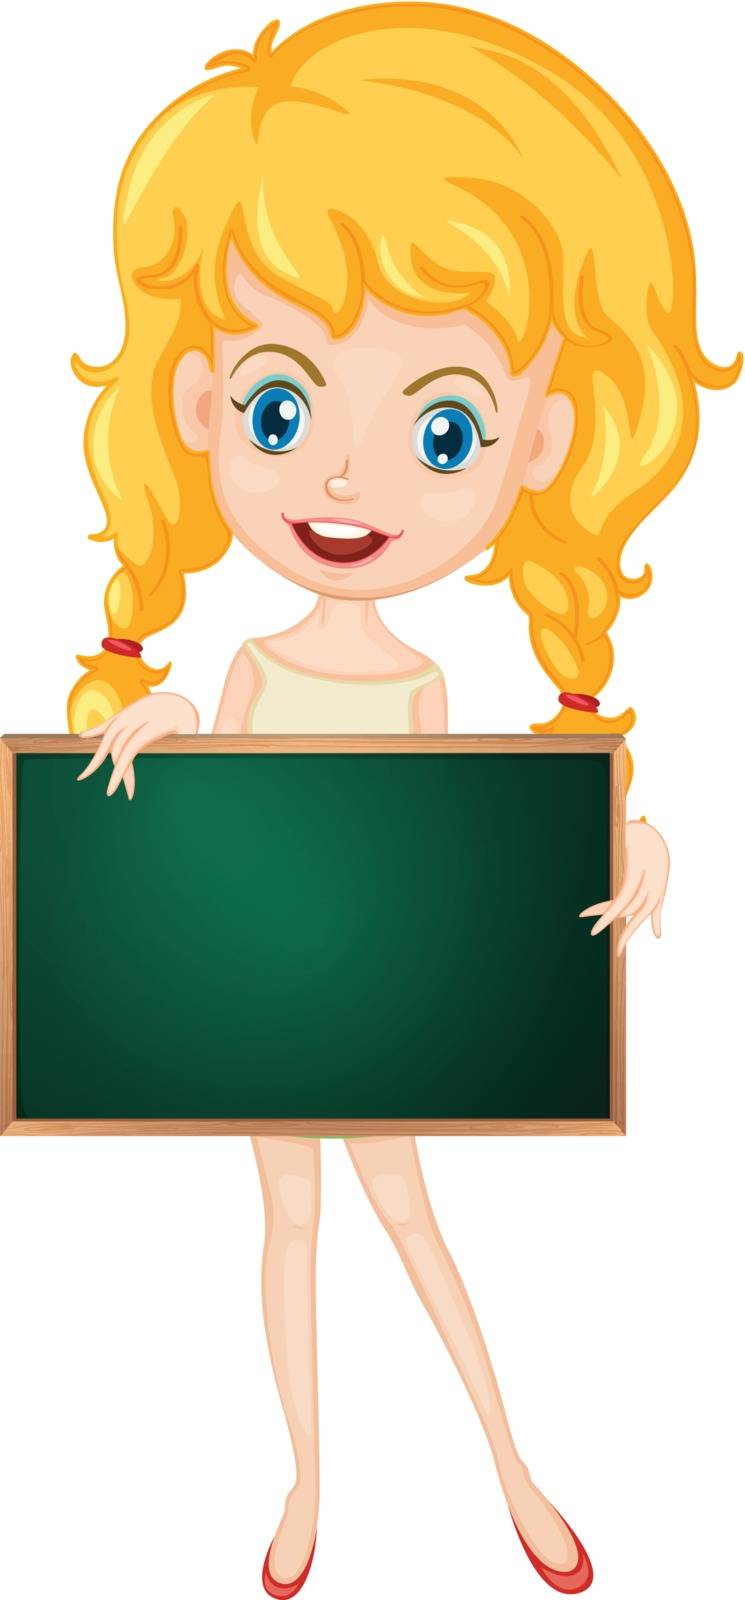 Illustration of a cartoon character holding a blank board